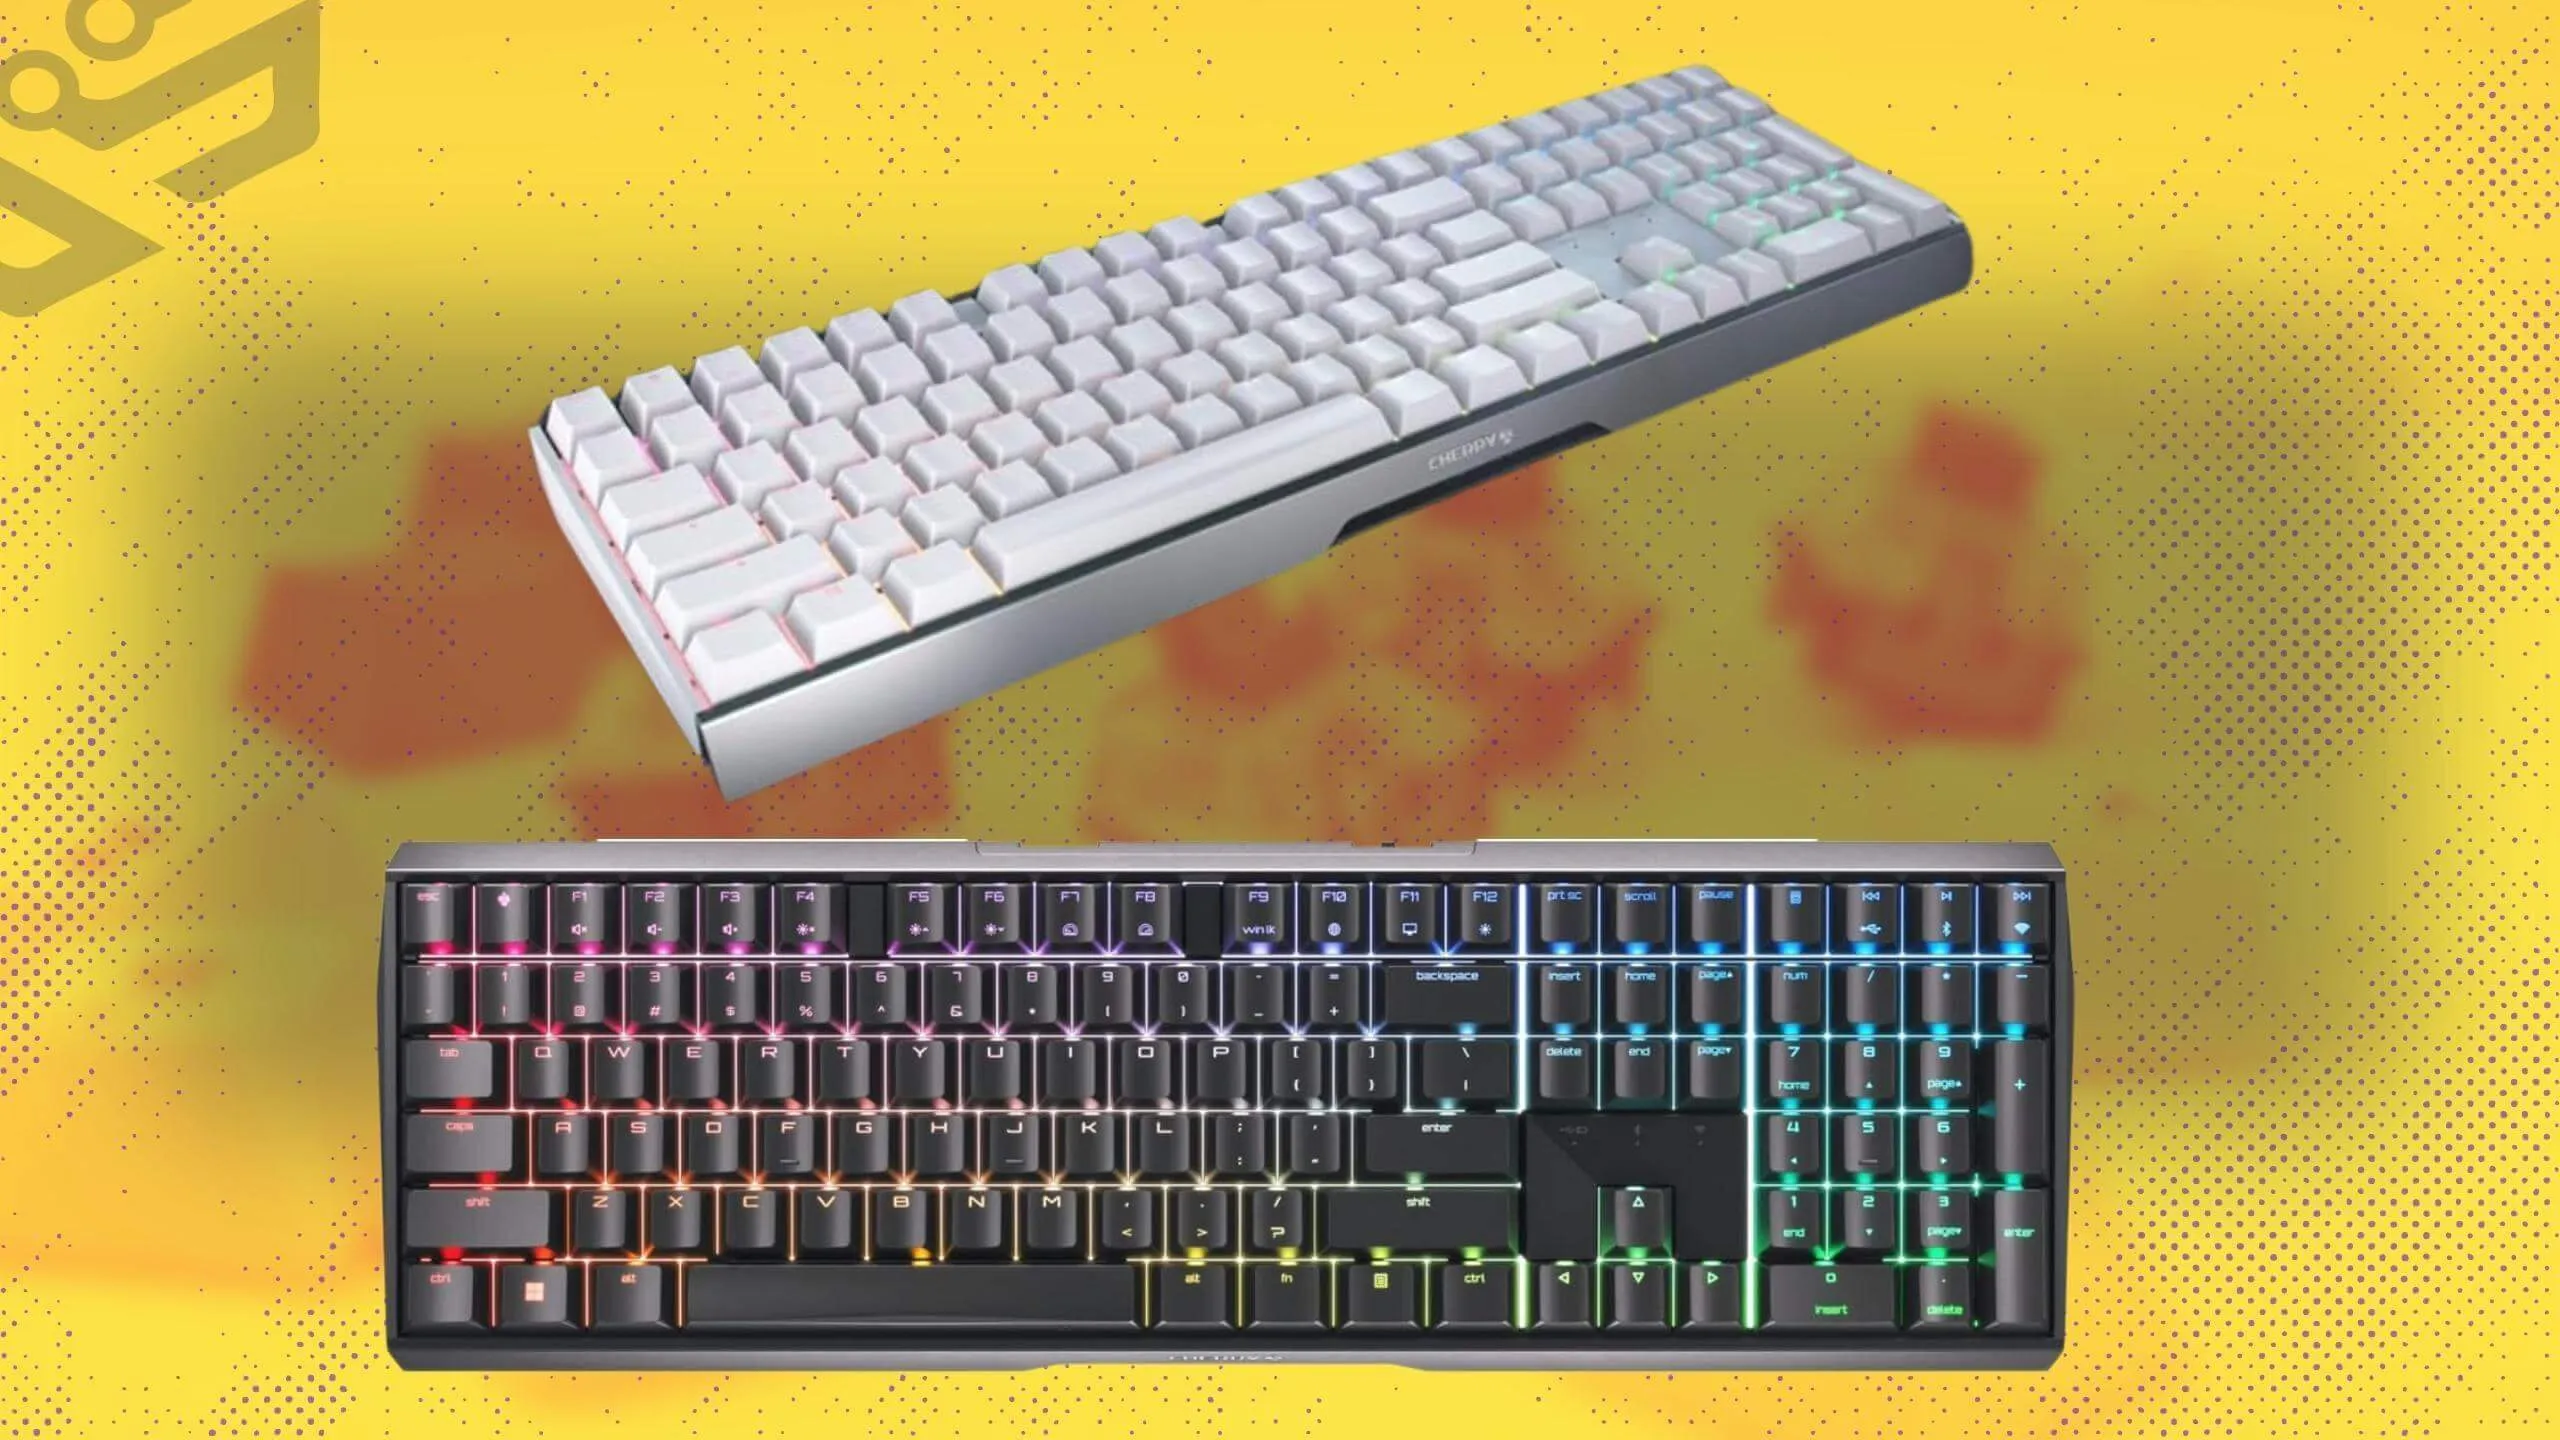 Cherry MX 3.0S Gaming keyboard in two colors on dirt yellow background